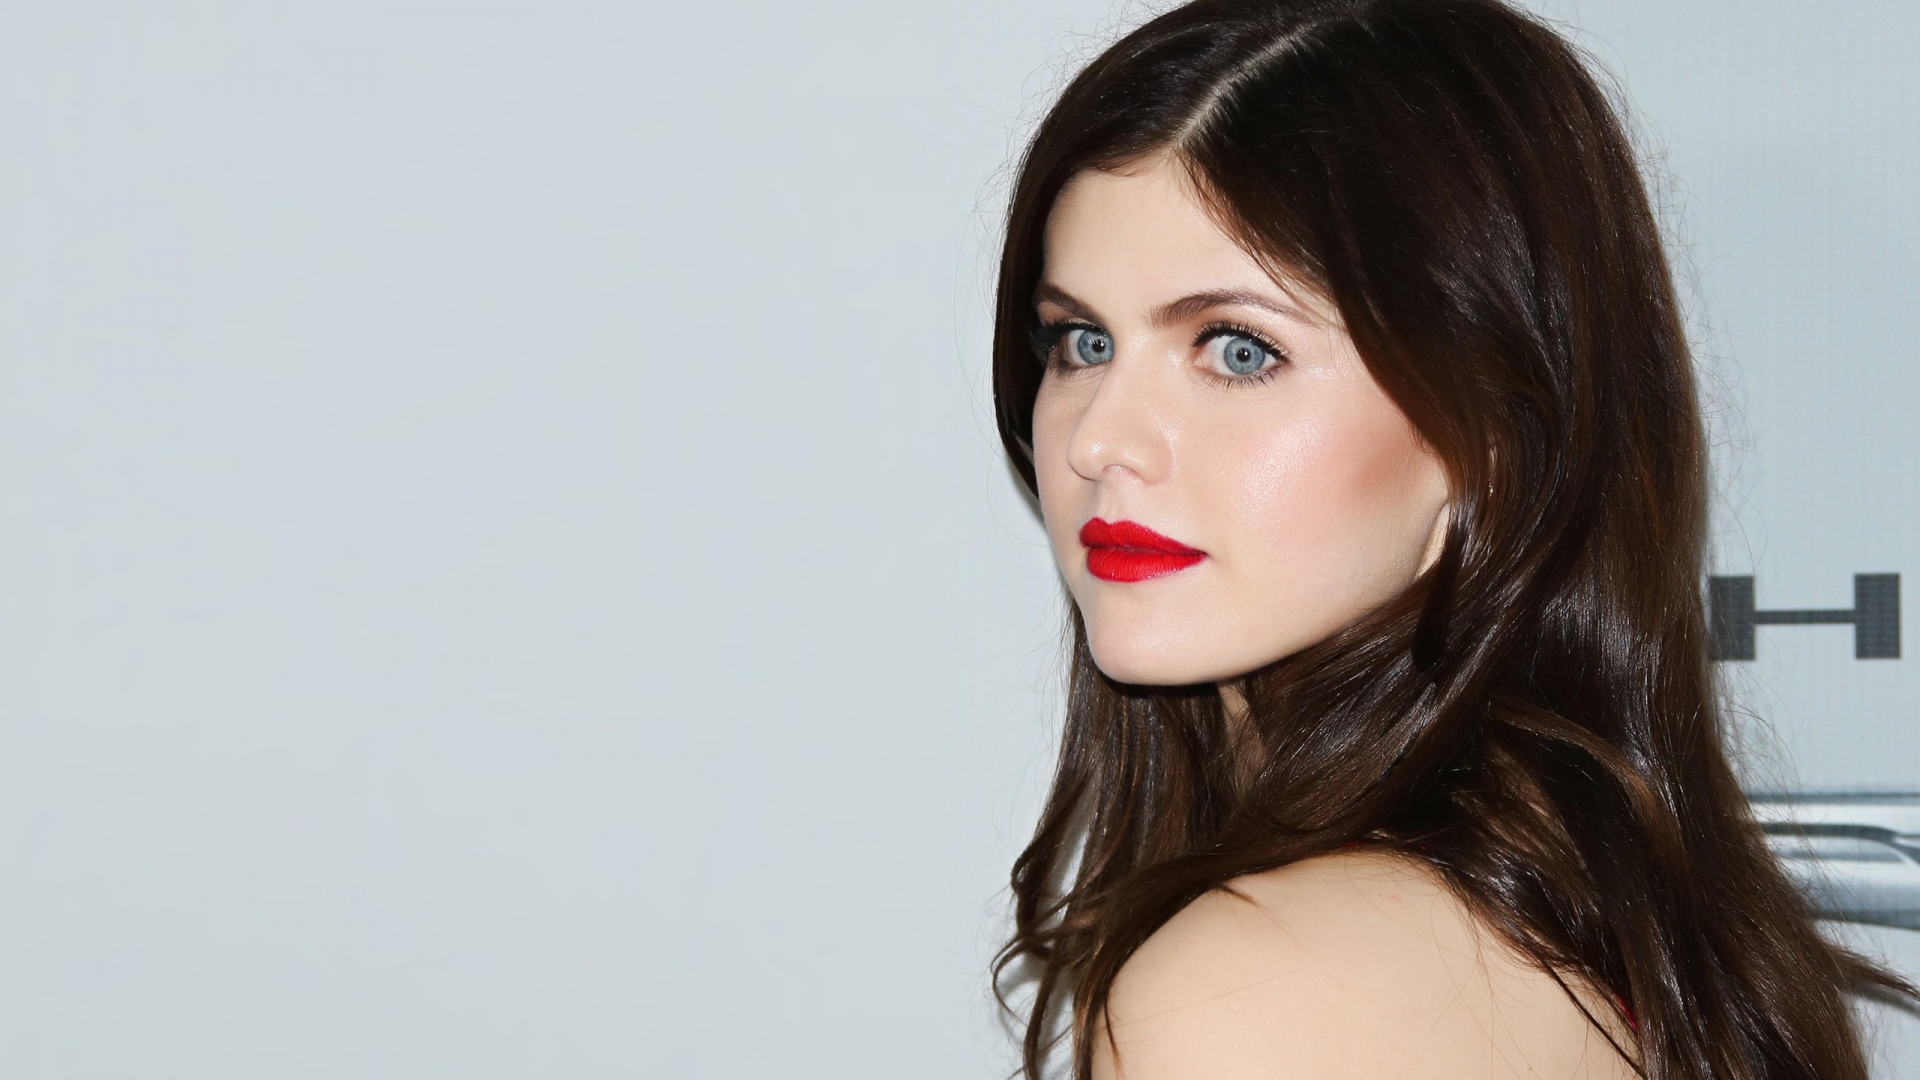 Alexandra Daddario Actress With Red Lips And Blue Eyes Wallpaper